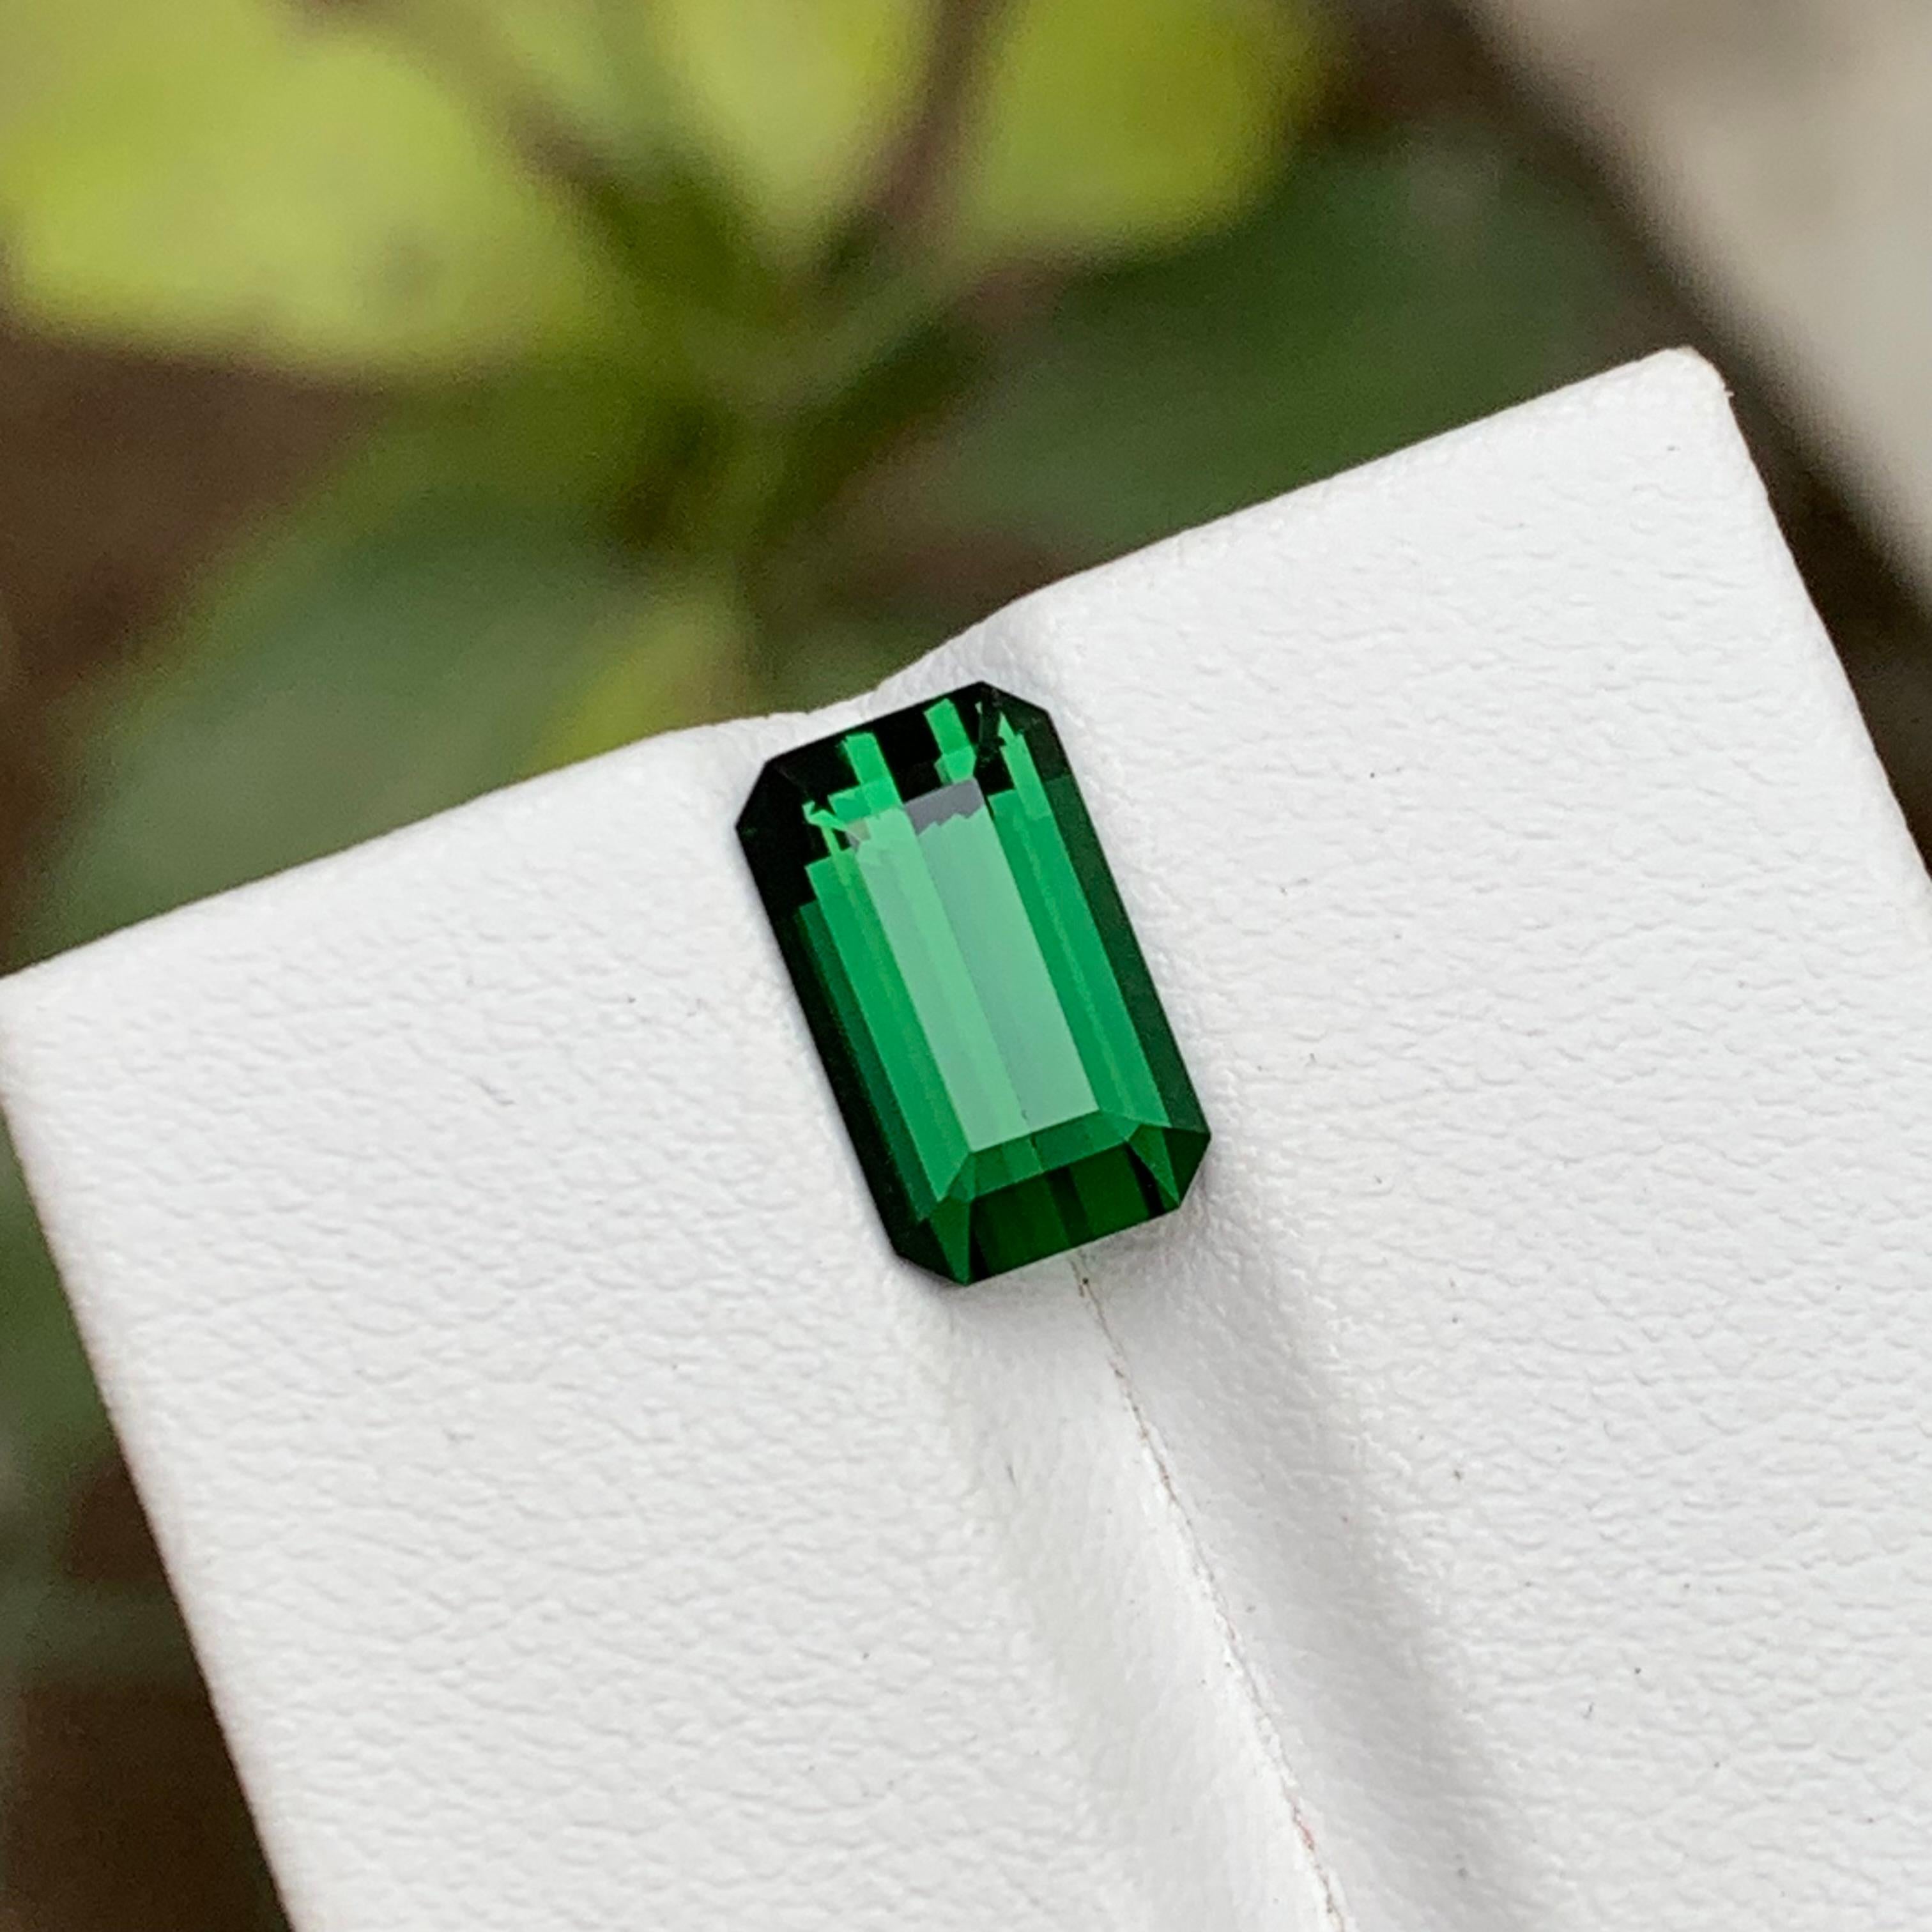 GEMSTONE TYPE: Tourmaline
PIECE(S): 1
WEIGHT: 2.95 Carats
SHAPE: Emerald
SIZE (MM):  10.95 x 6.47 x 4.71
COLOR: Green
CLARITY: Eye Clean
TREATMENT: None
ORIGIN: Afghanistan 🇦🇫 
CERTIFICATE: On demand

This stunning 2.95 carat green tourmaline